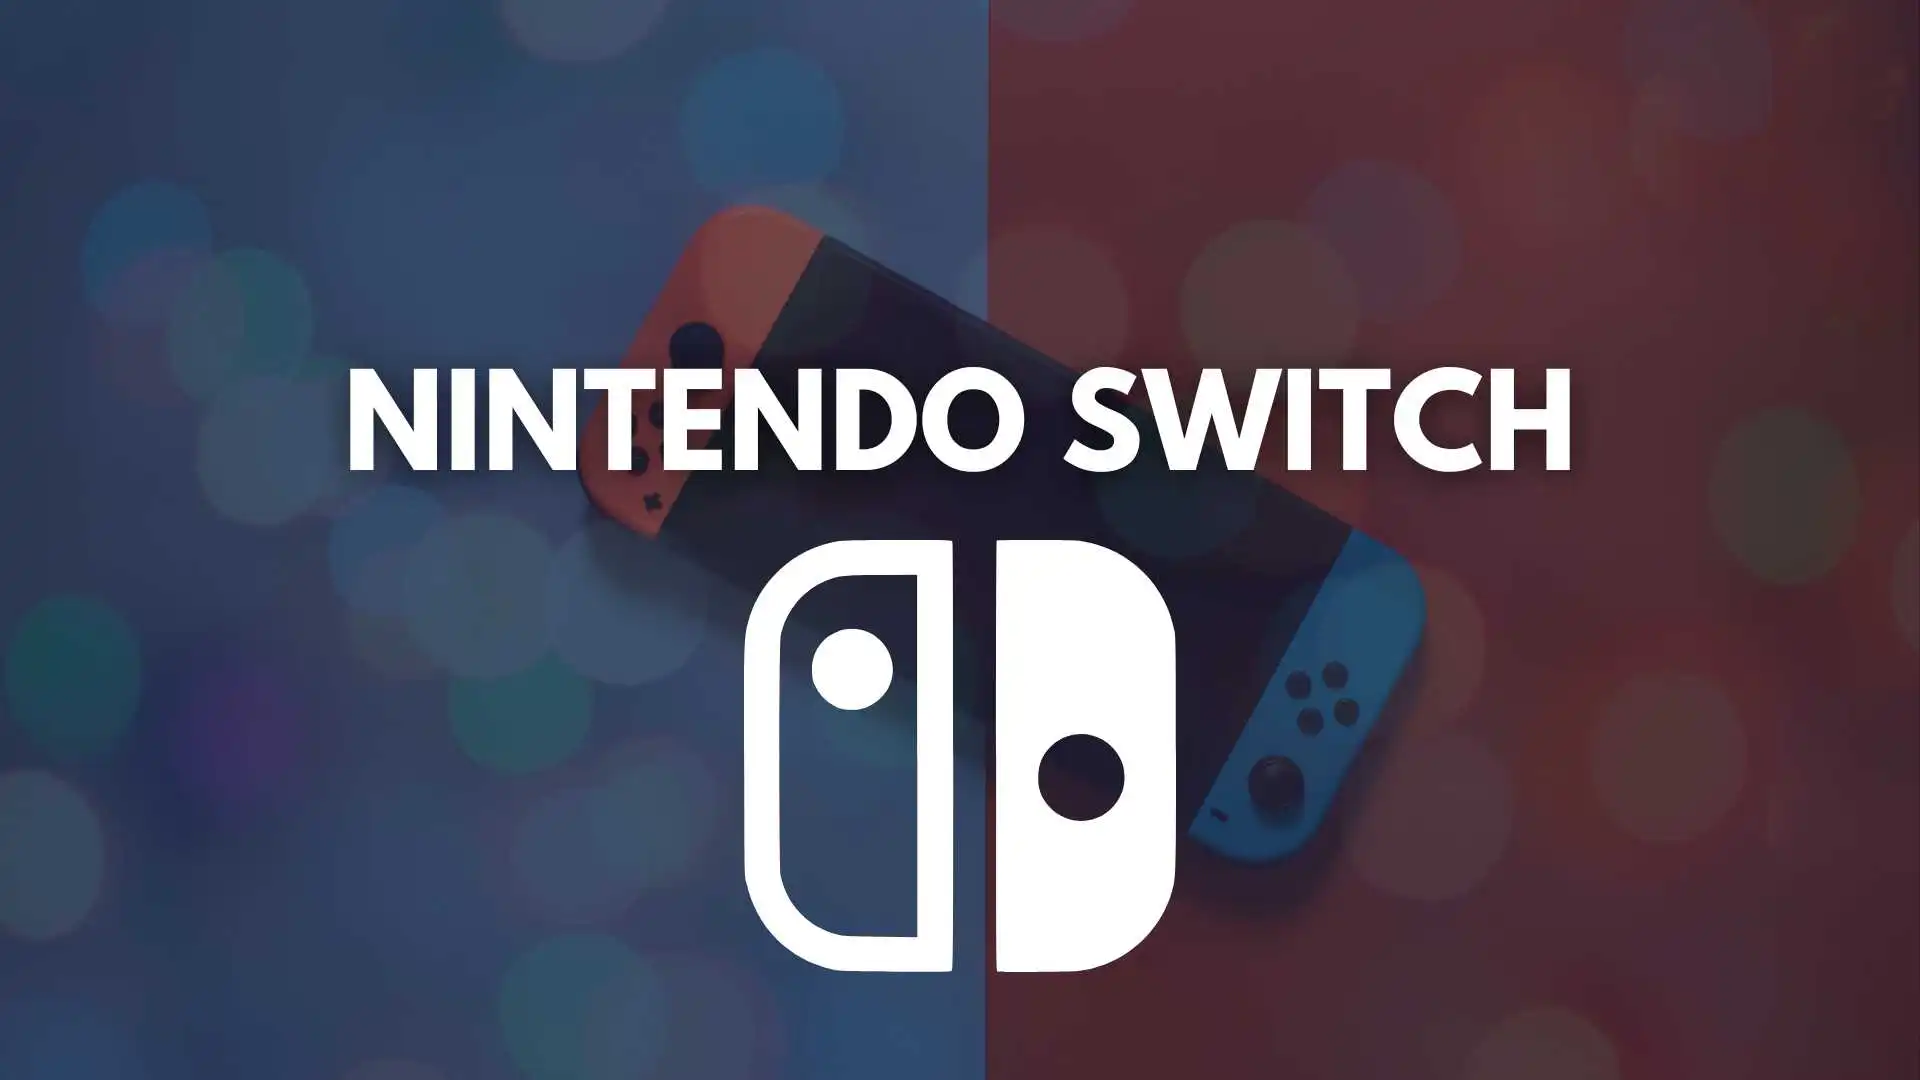 For a Limited Time, Highly Rated Nintendo Switch Game $1.99